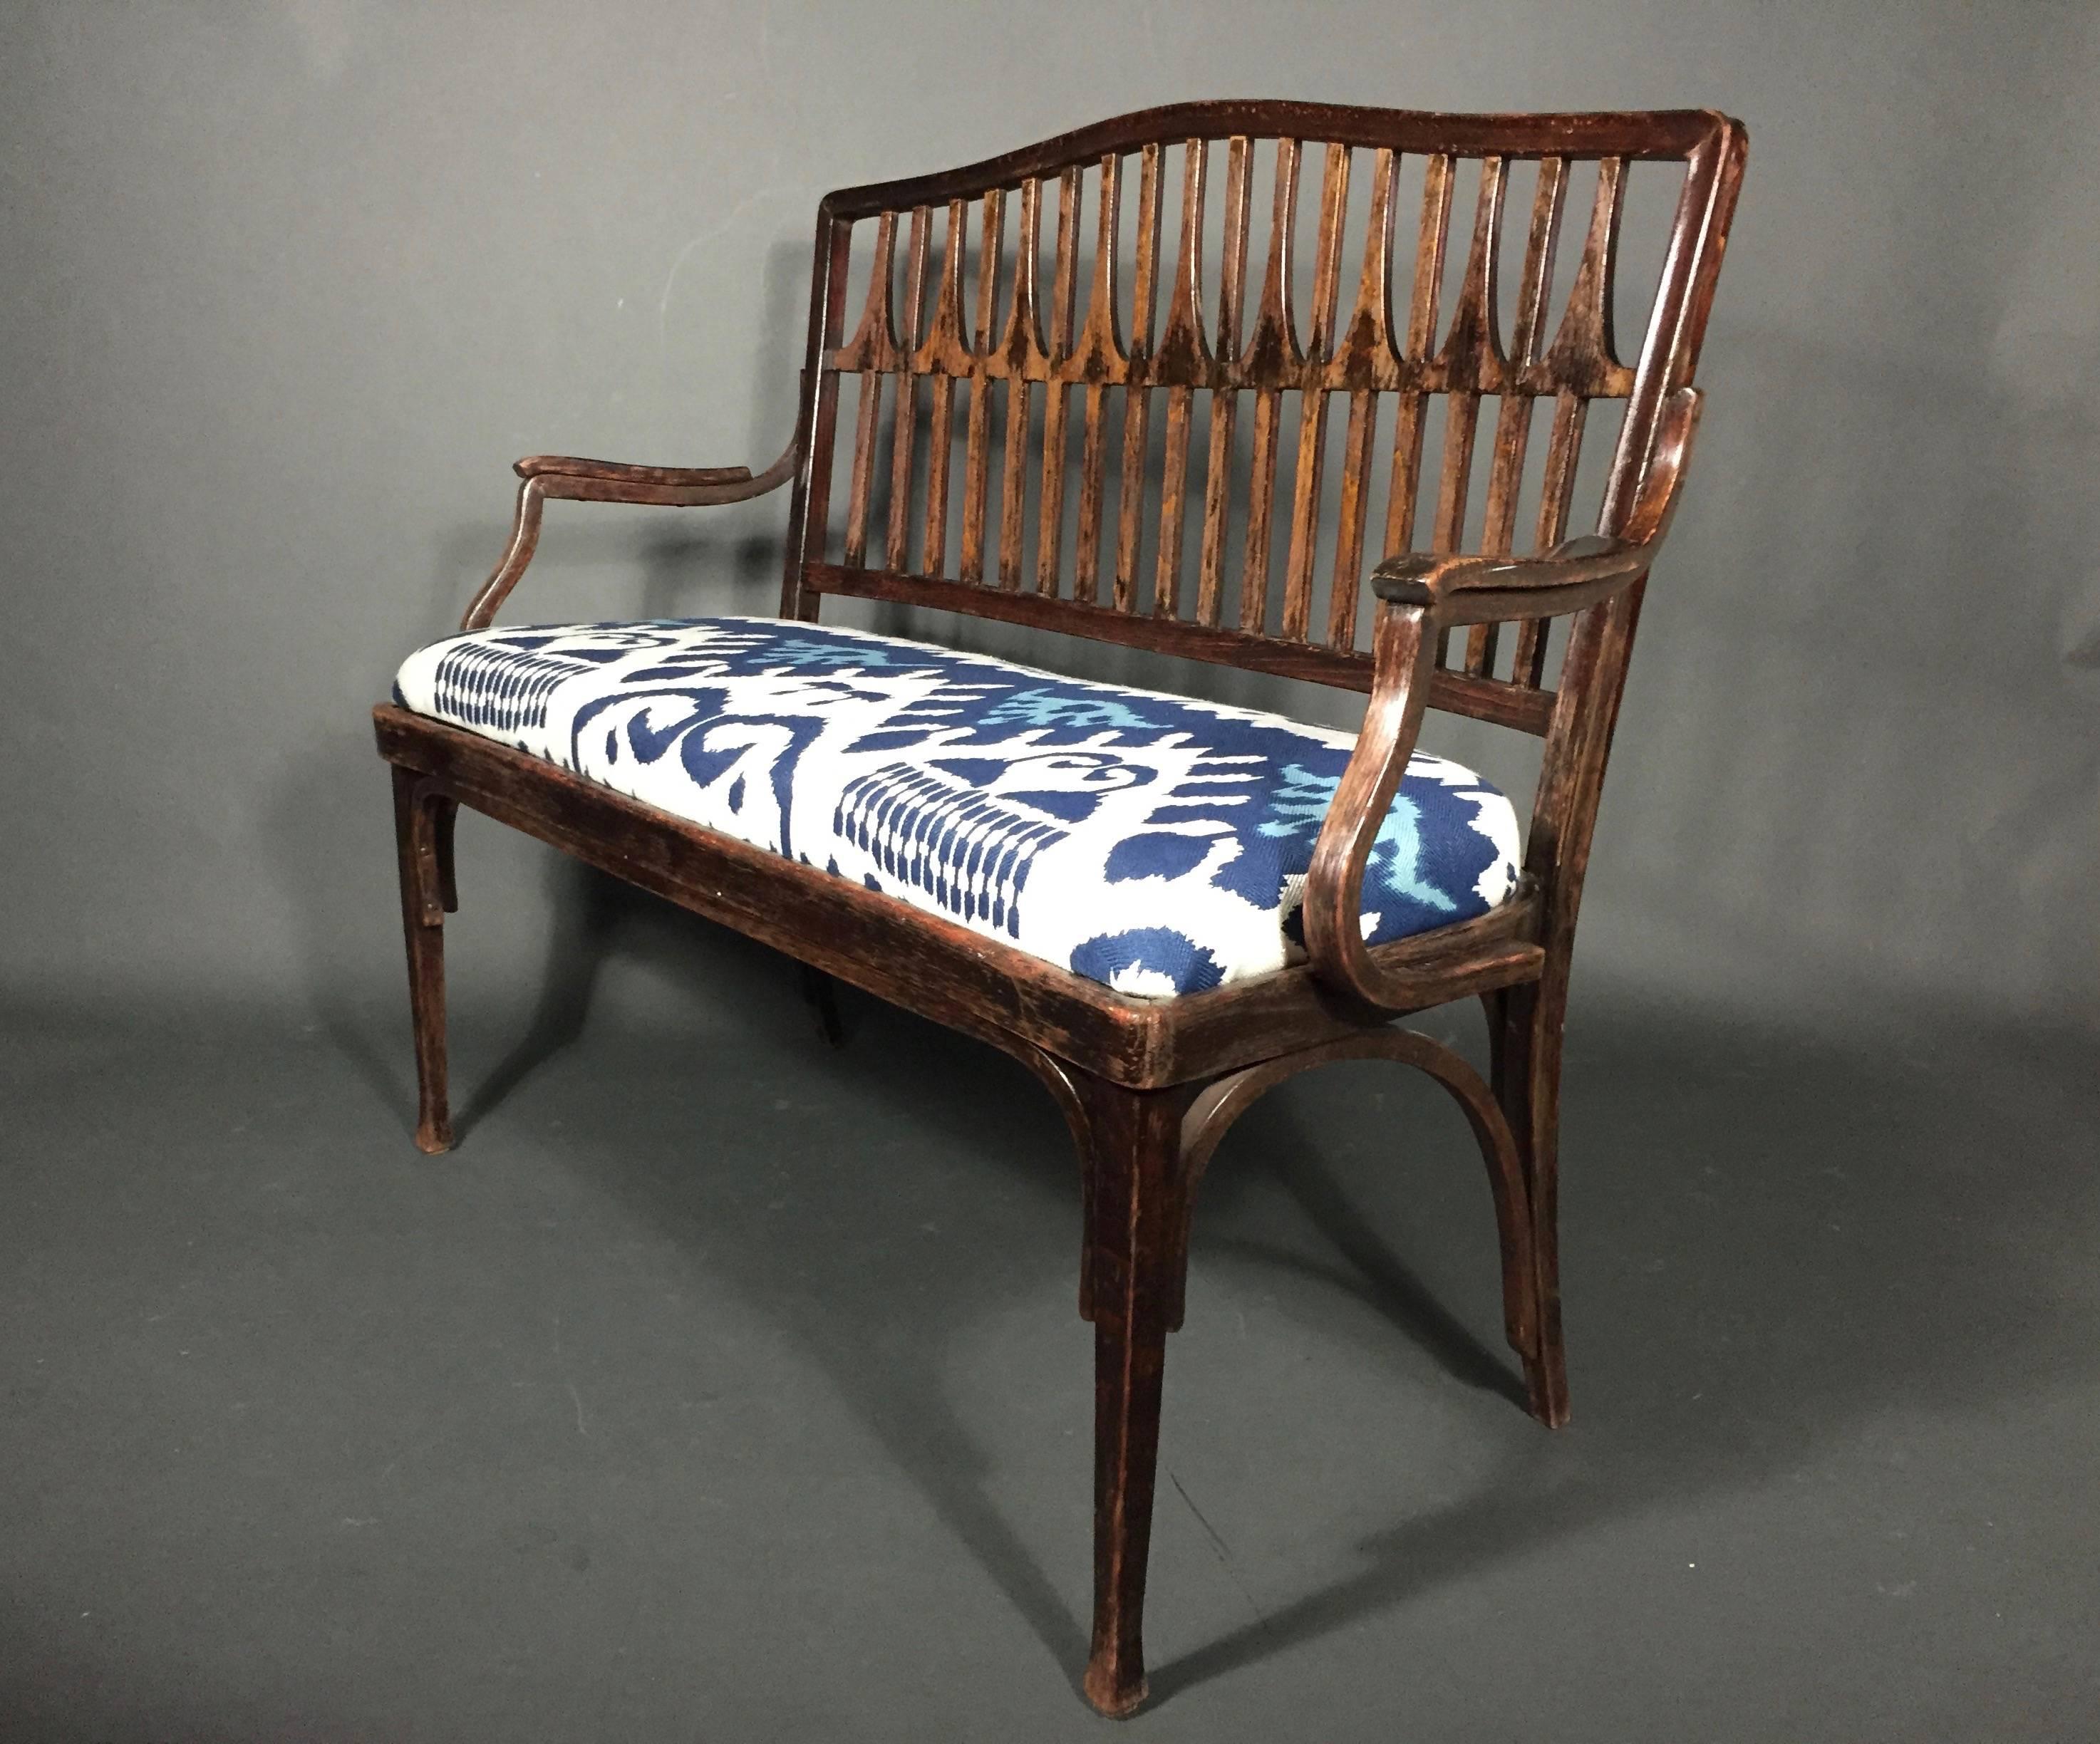 A wonderful settee from the Vienna Succession in acajou stained wood with updated upholstery, stylized Art Nouveau back, bentwood arms and legs. Designed by Gustav Siegel and manufactured by Jacob & Josef Kohn, Vienna Austria, circa